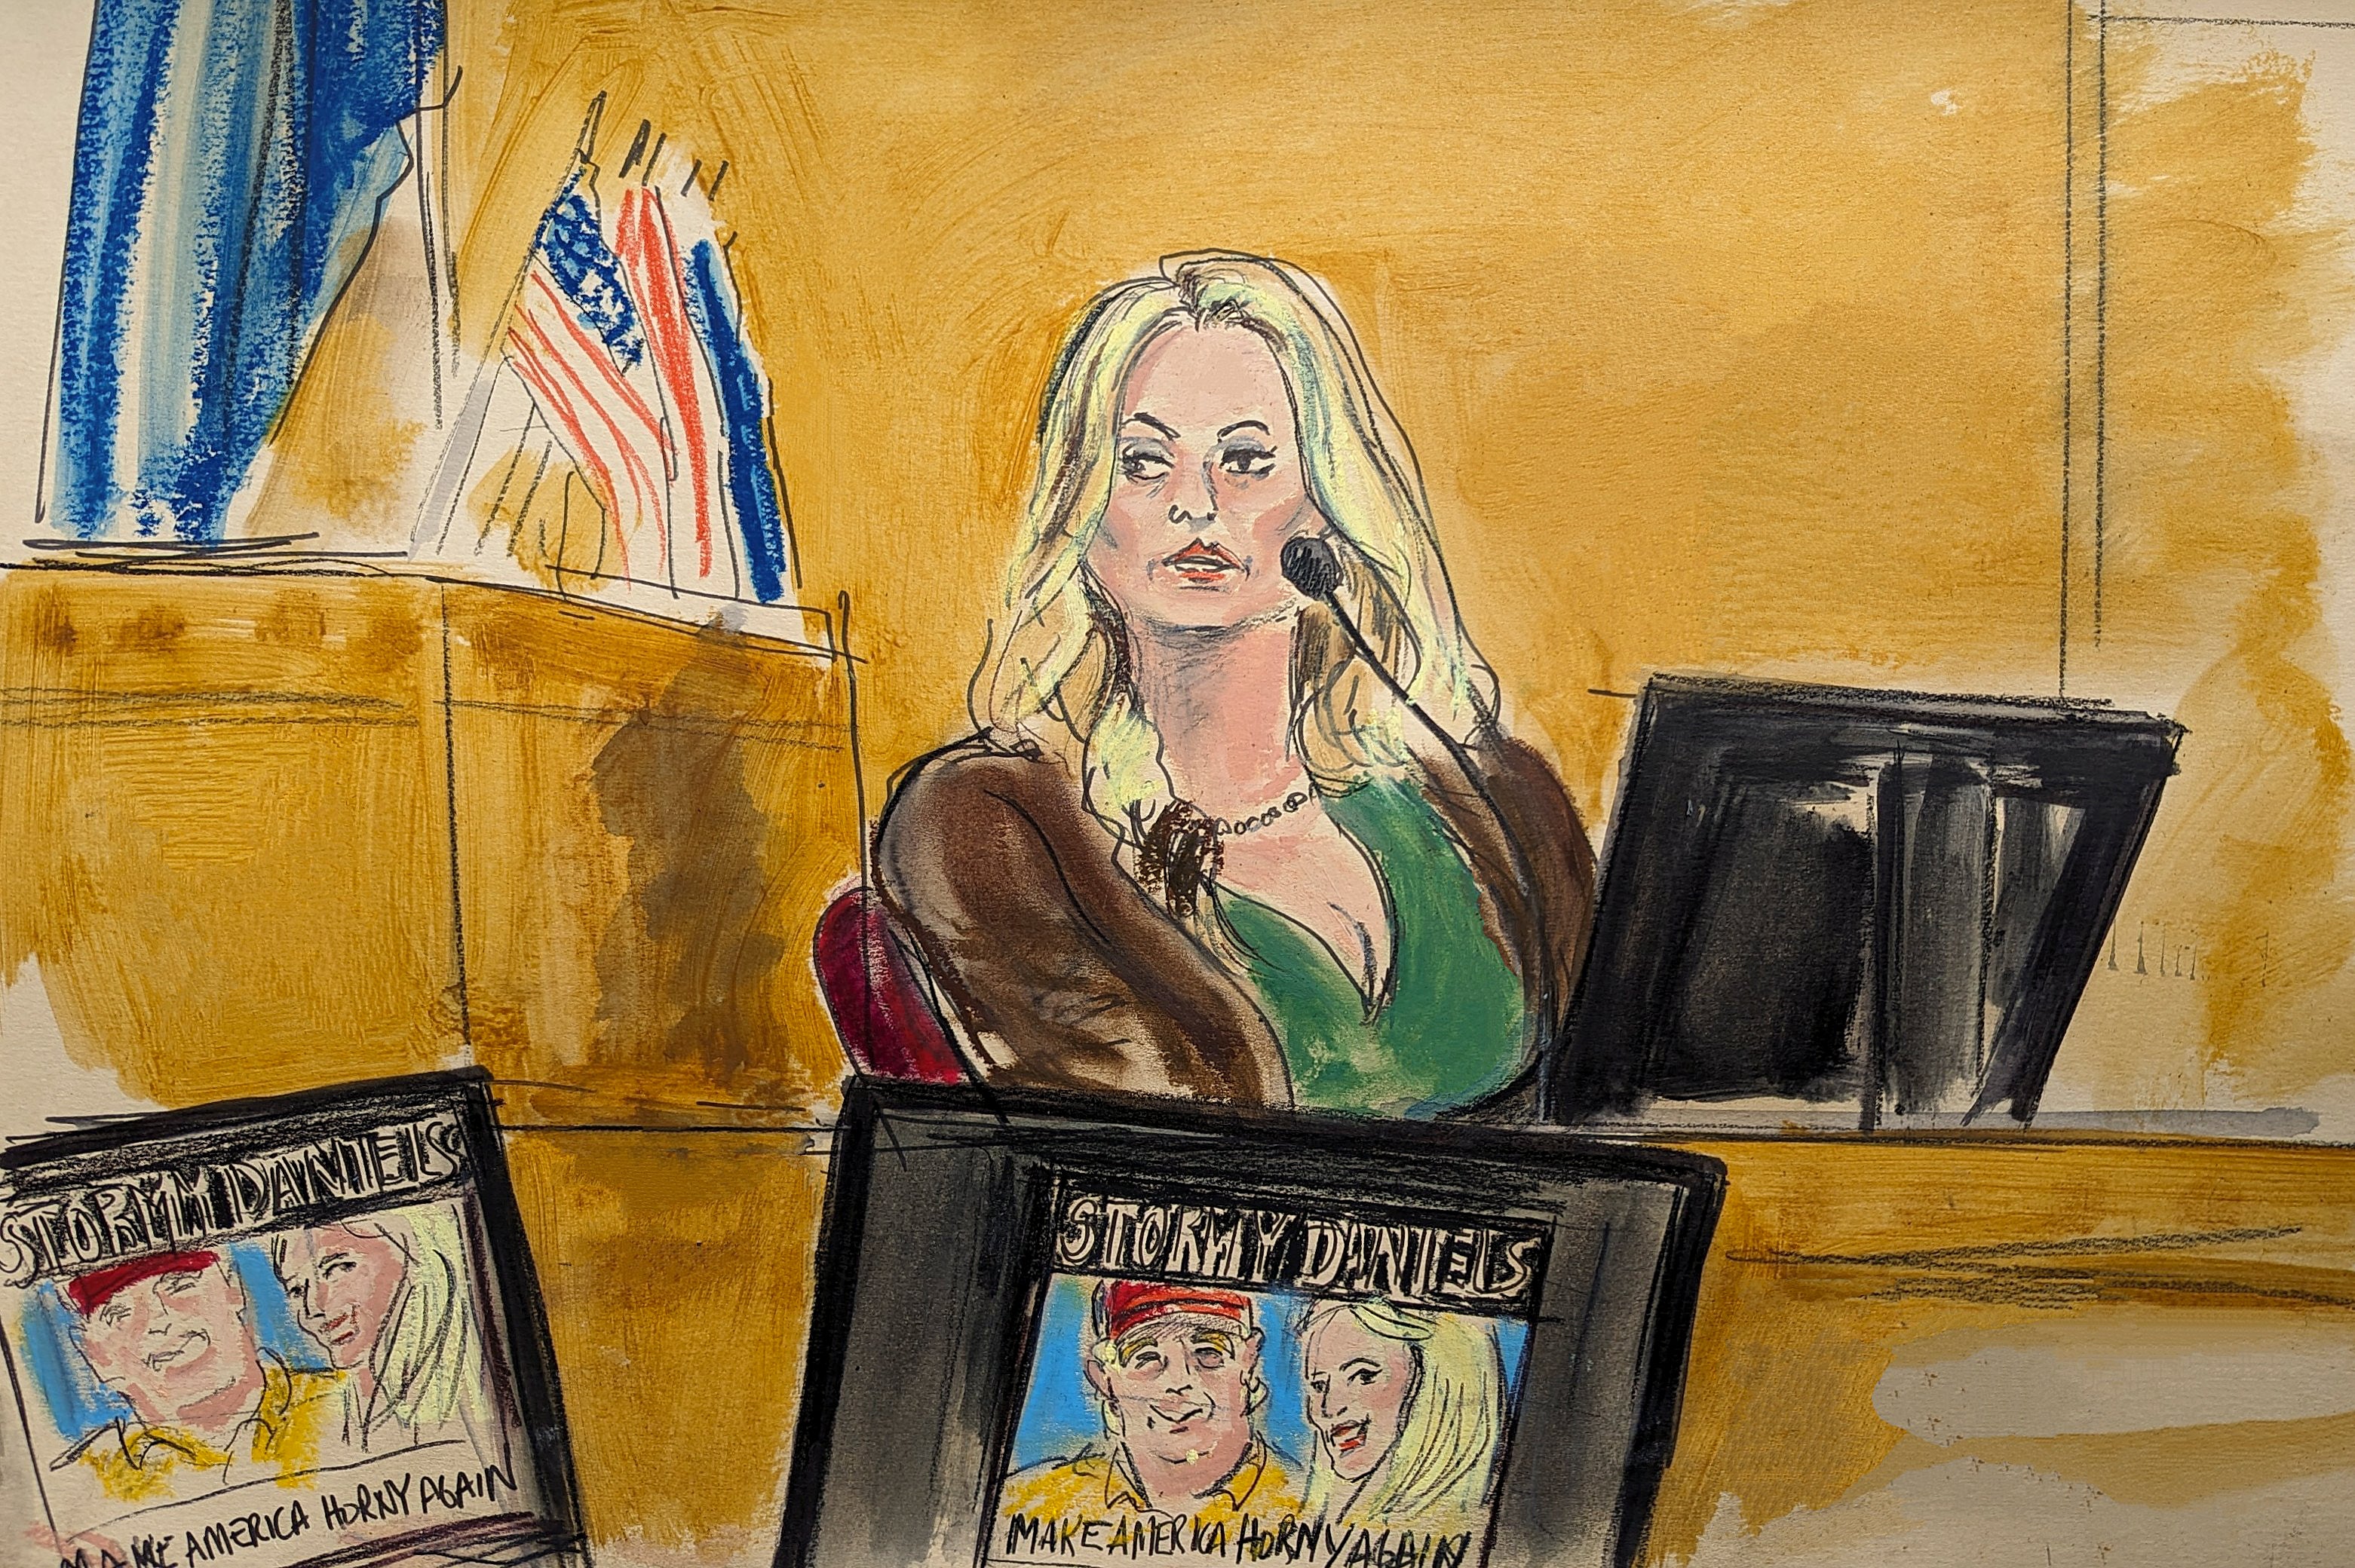 A courtroom sketch of Stormy Daniels testifying in Donald Trump’s hush money trial. She told the court details of their alleged 2006 affair last week